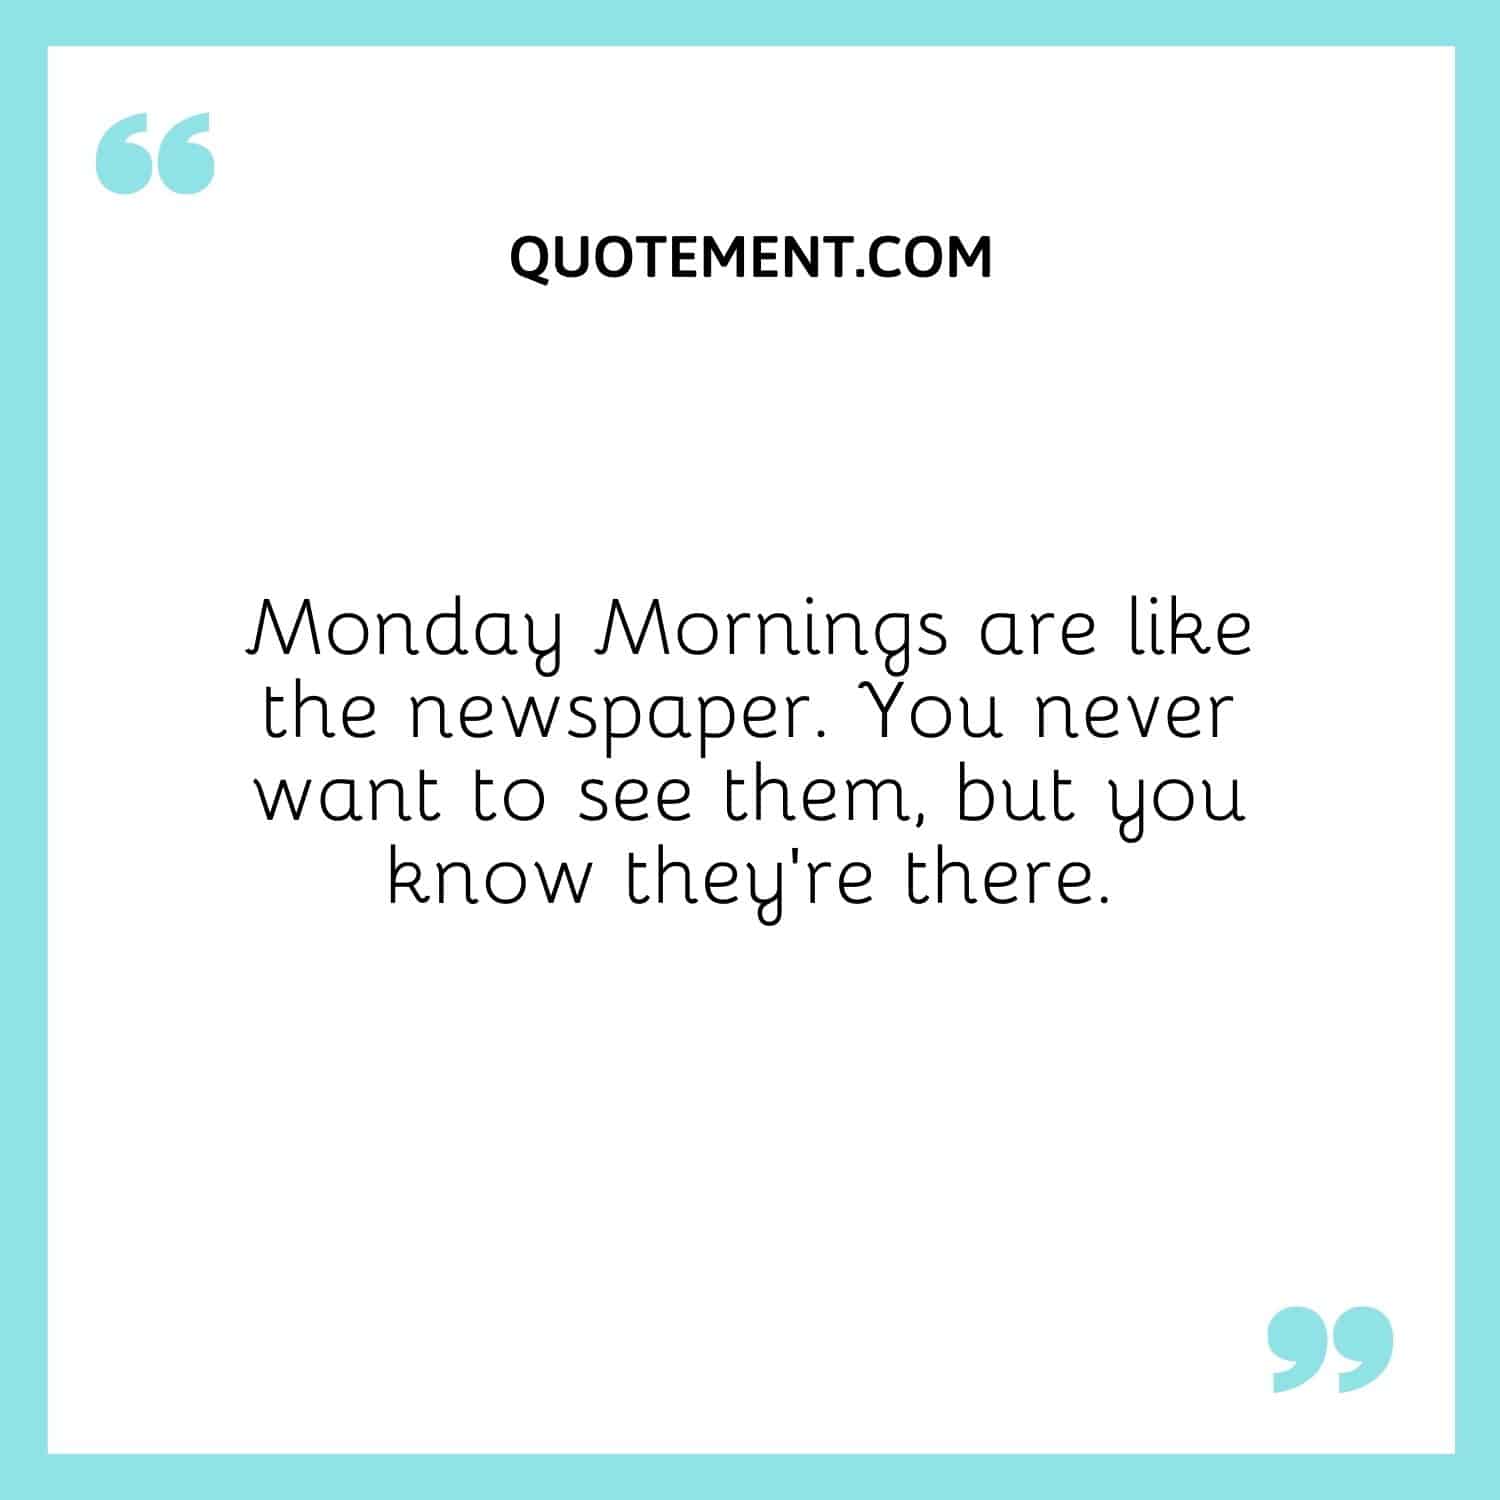 Monday Mornings are like the newspaper.